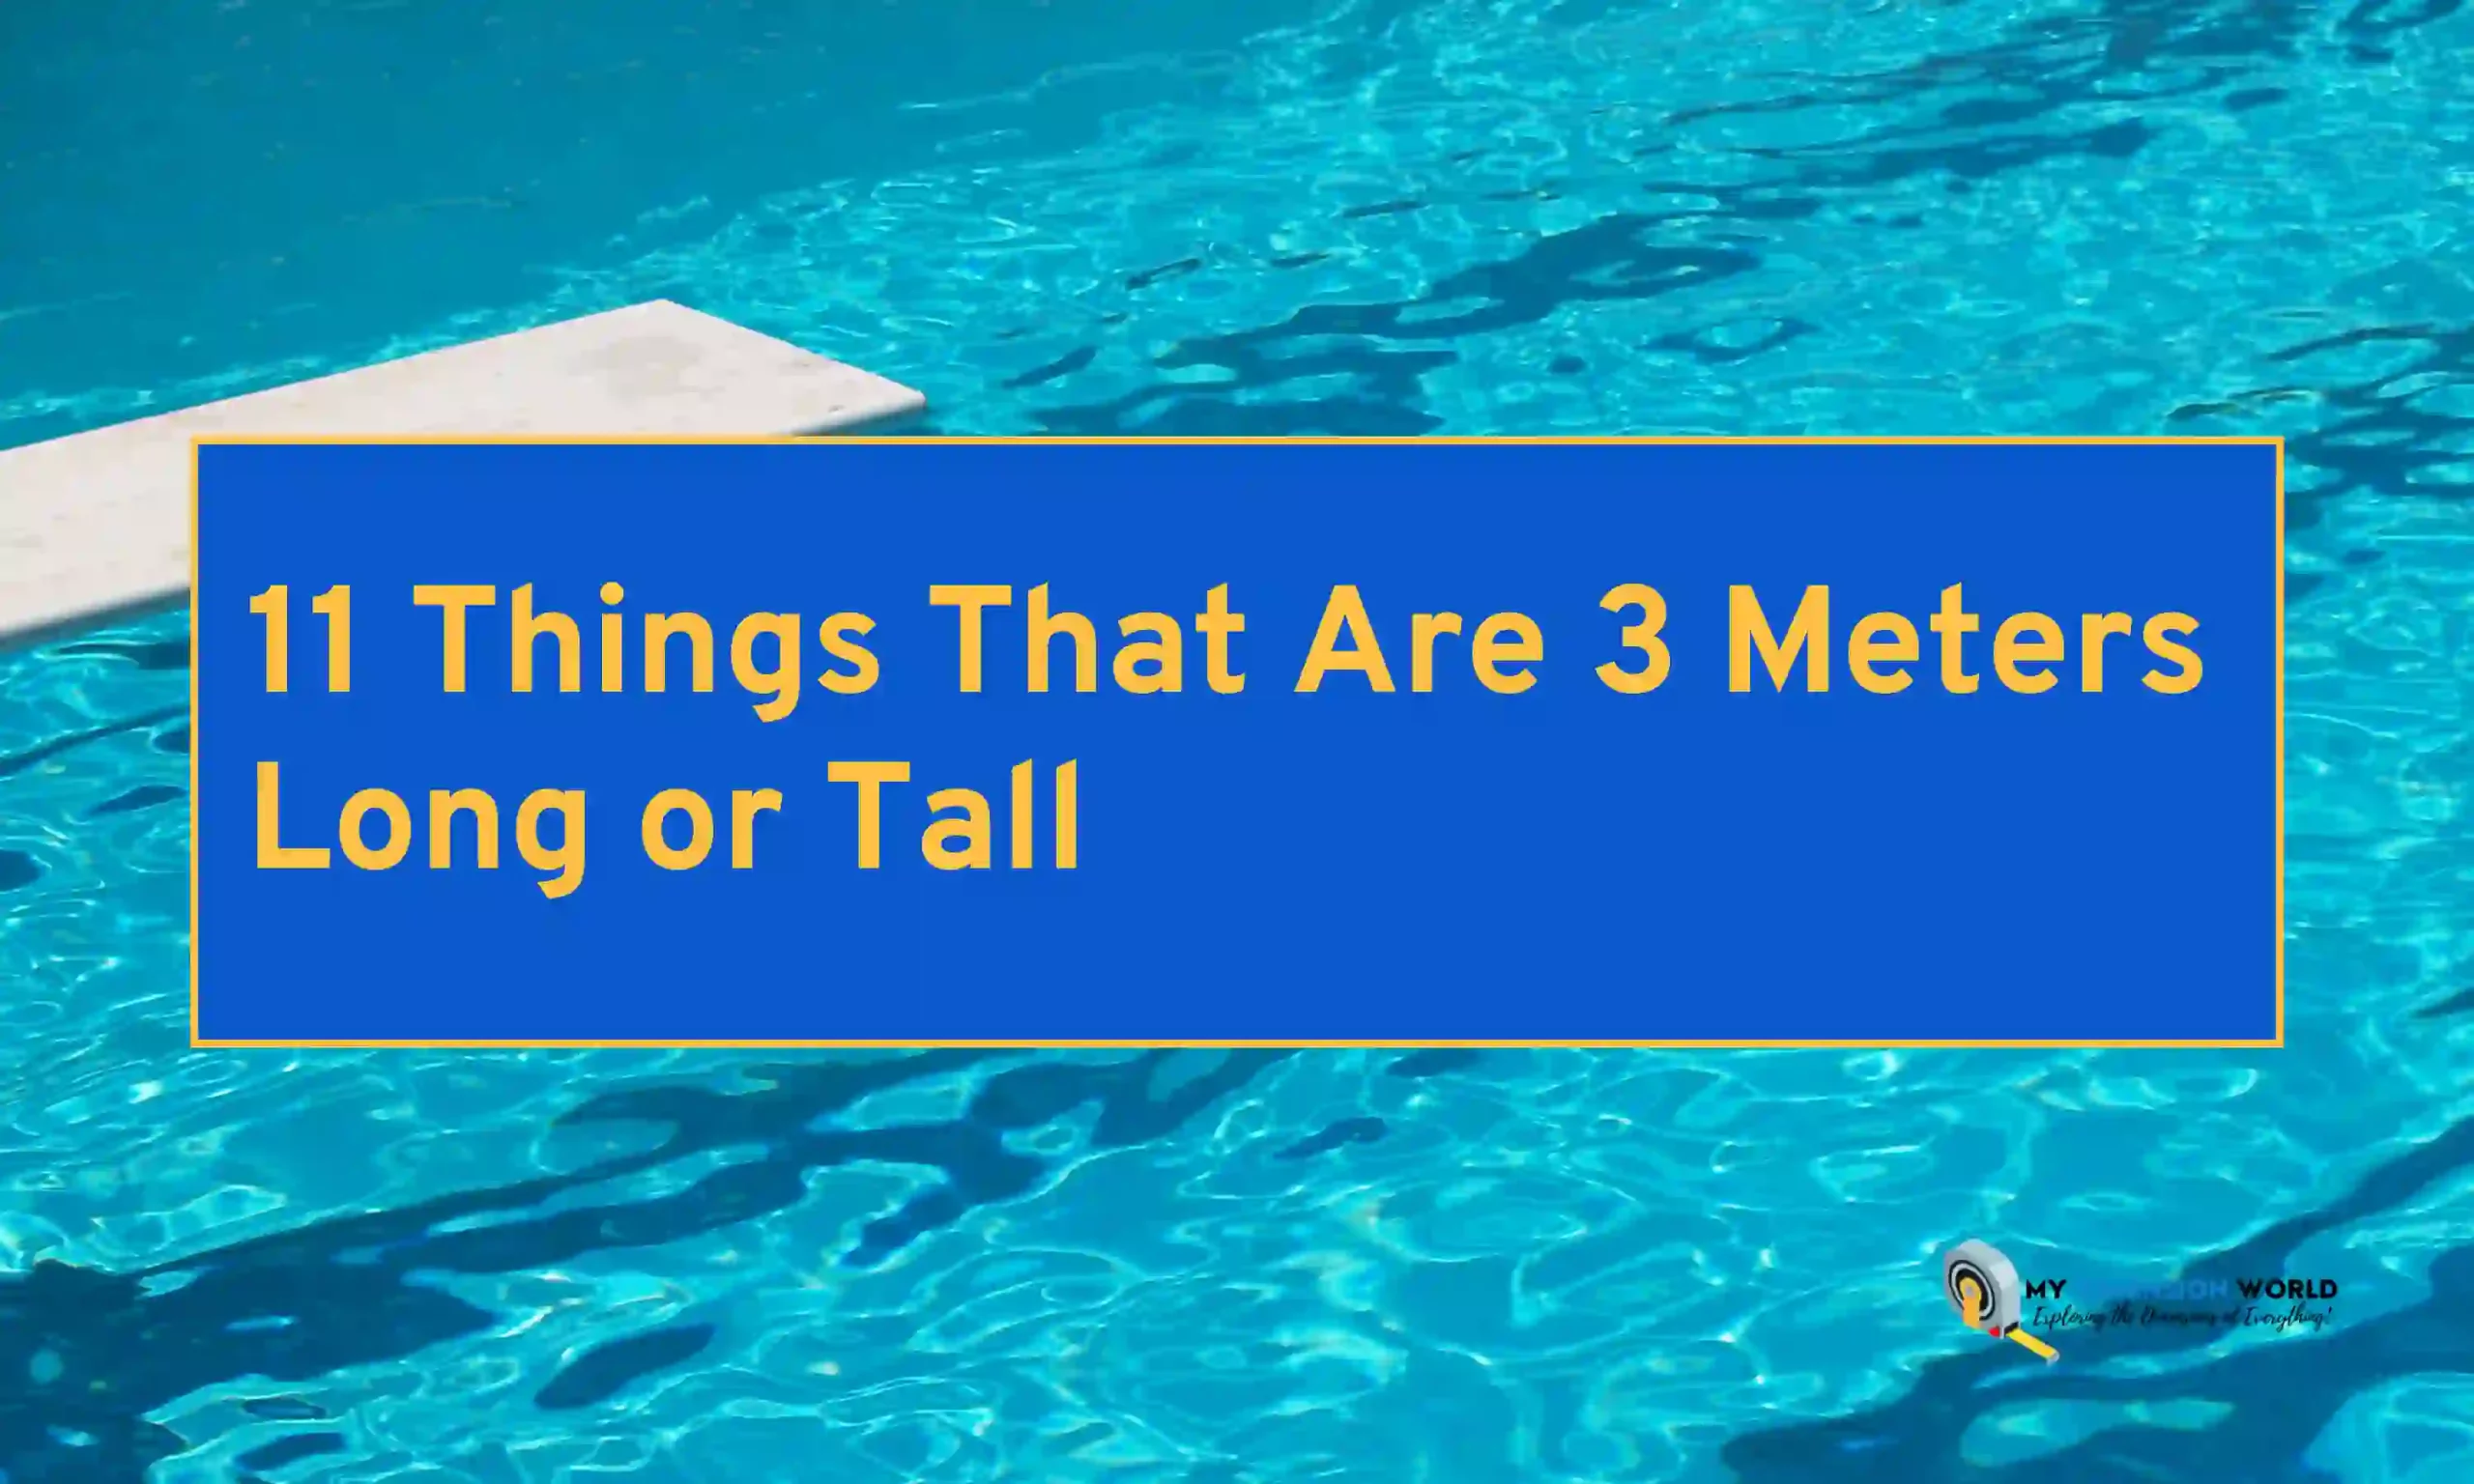 11 Things That Are 3 Meters Long or Tall